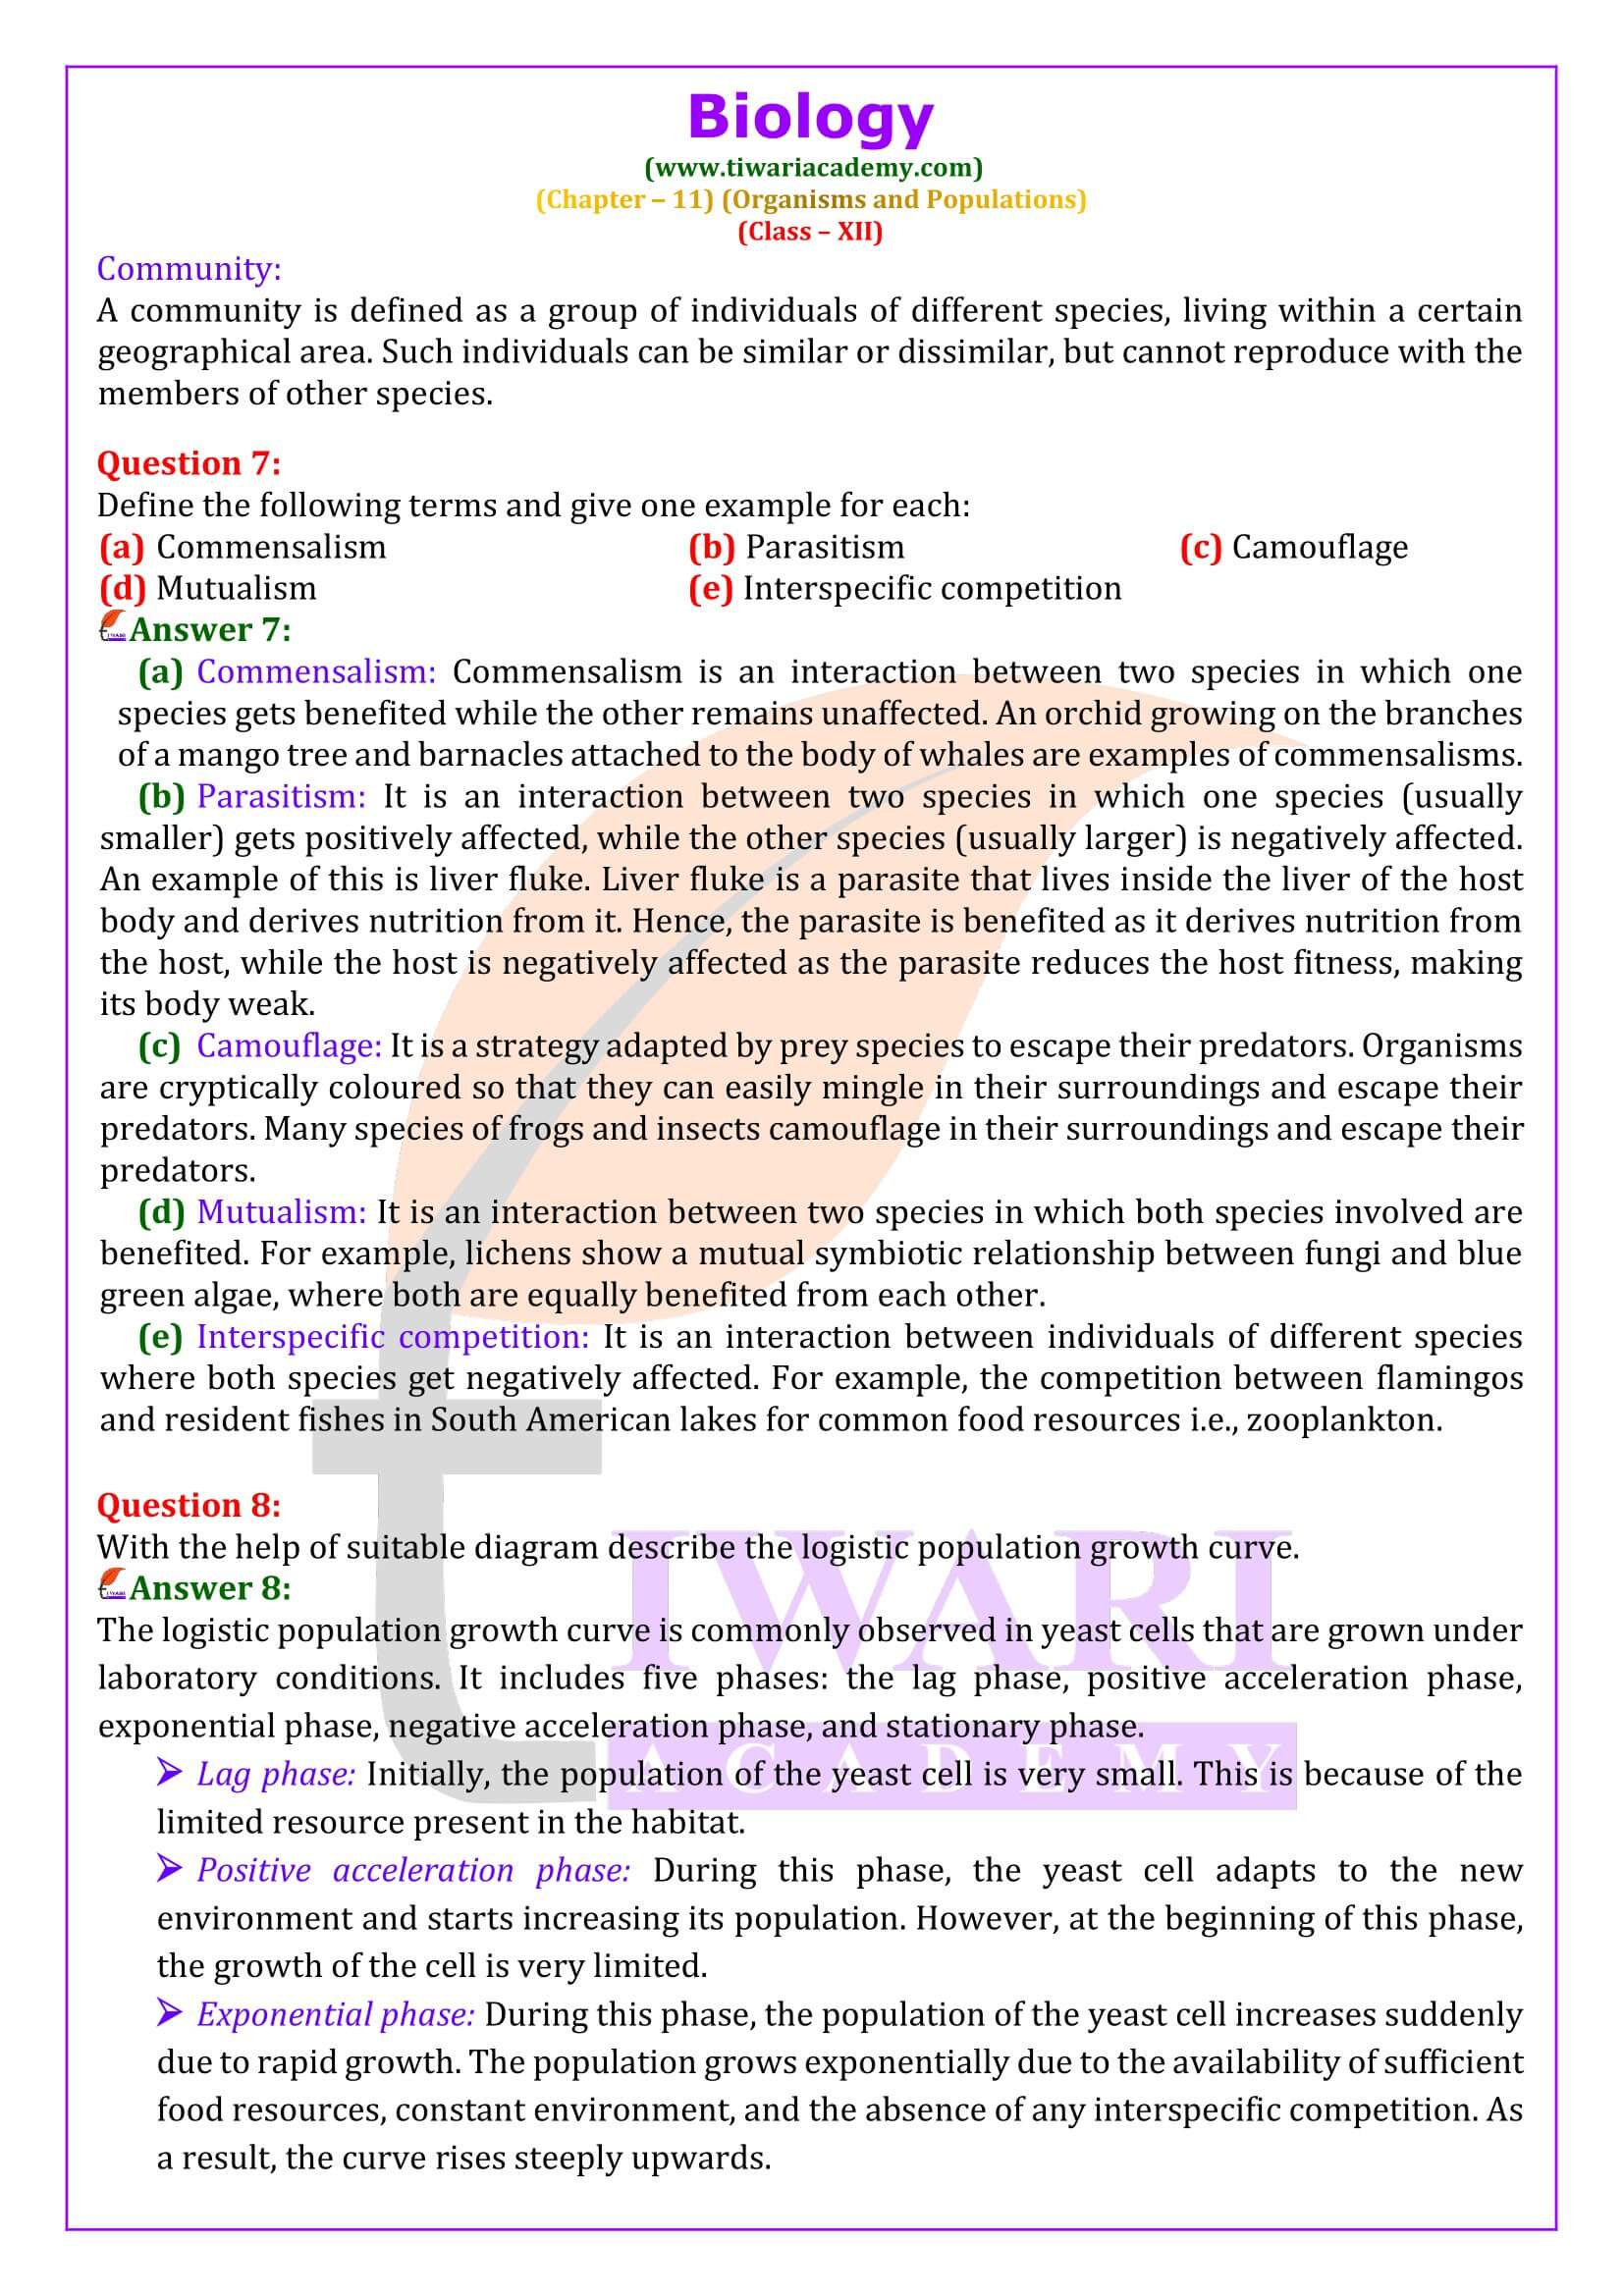 NCERT Solutions for Class 12 Biology Chapter 11 in English Medium